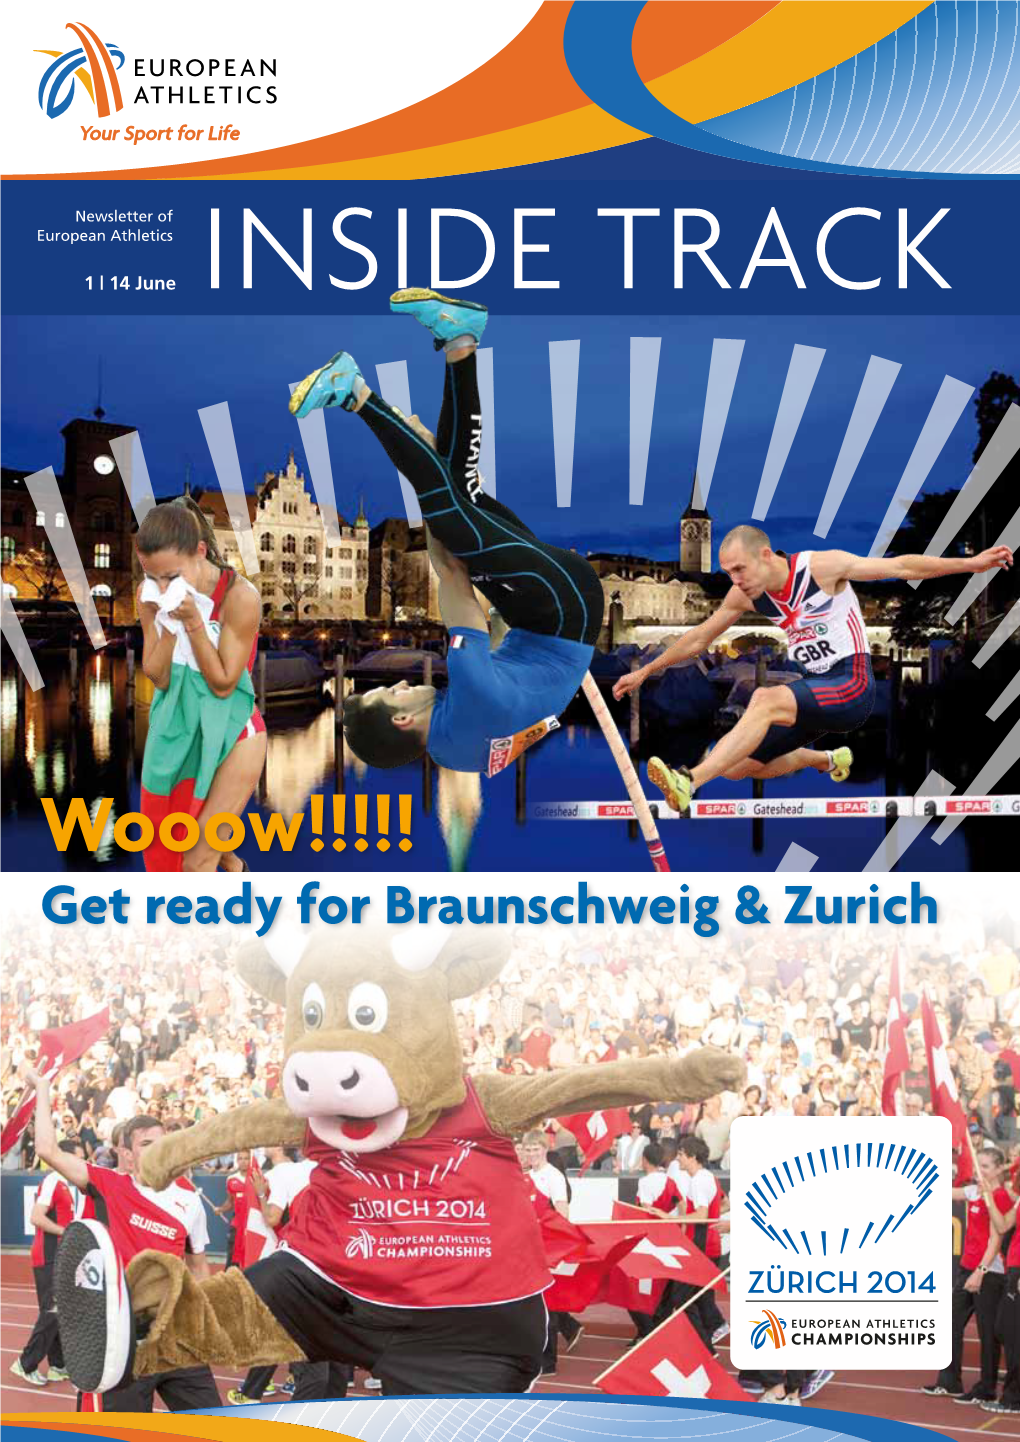 Wooow!!!!! Get Ready for Braunschweig & Zurich Your Sport for Life WORD from the PRESIDENT